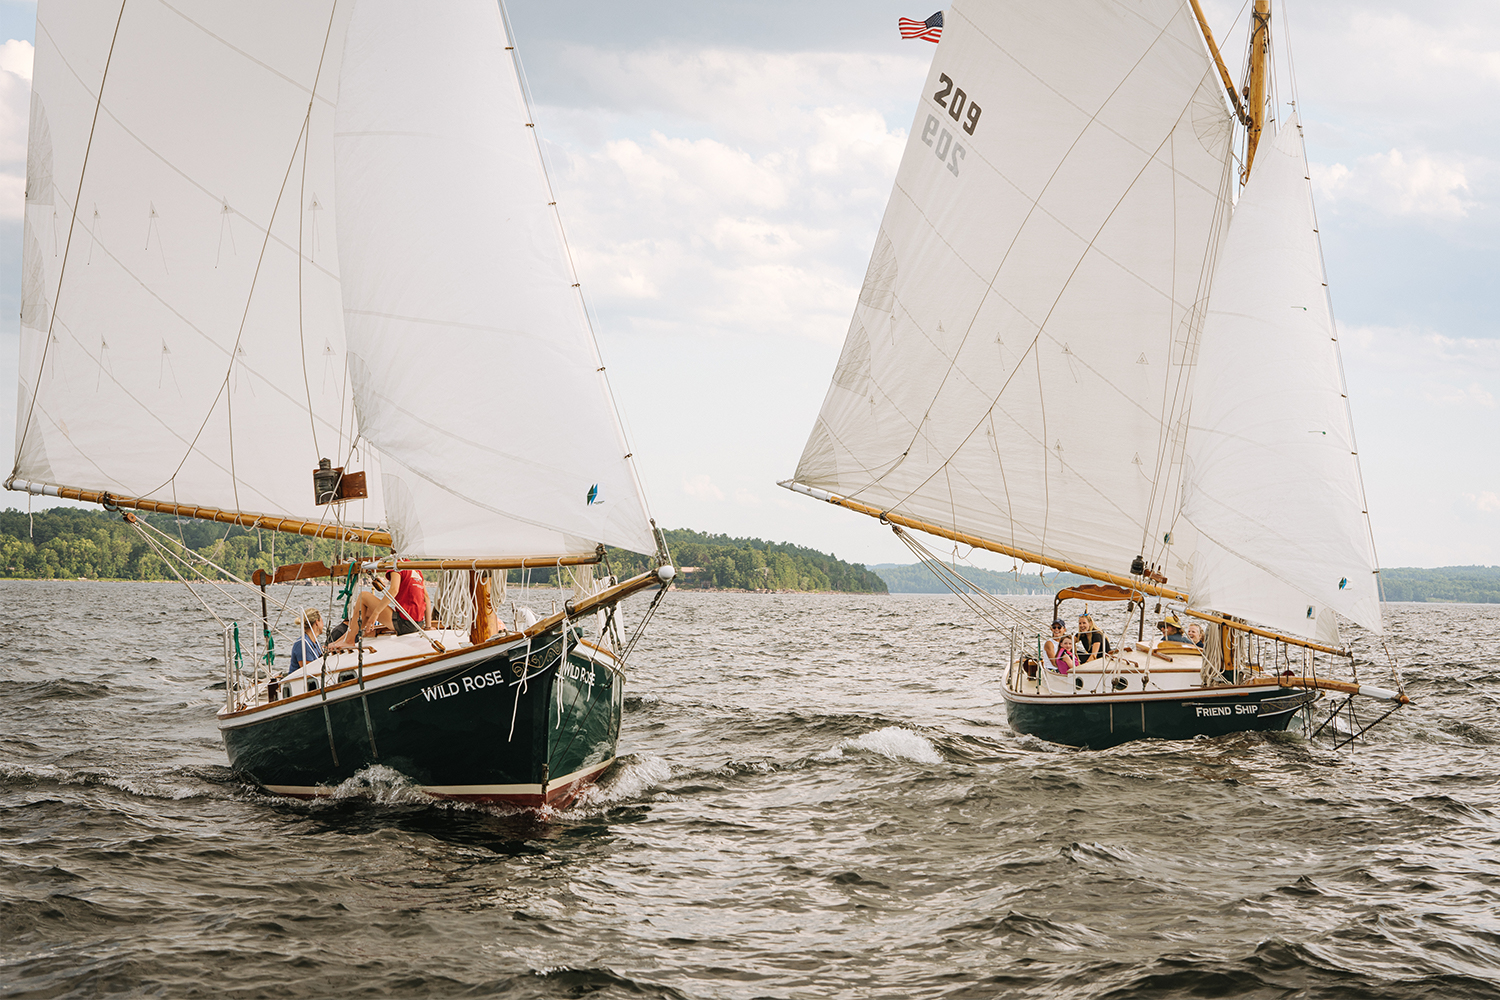 The two sloop boats available from Whistling Man Schooner out of Burlington, Vermont, the Friend Ship and White Rose, sailing on Lake Champlain